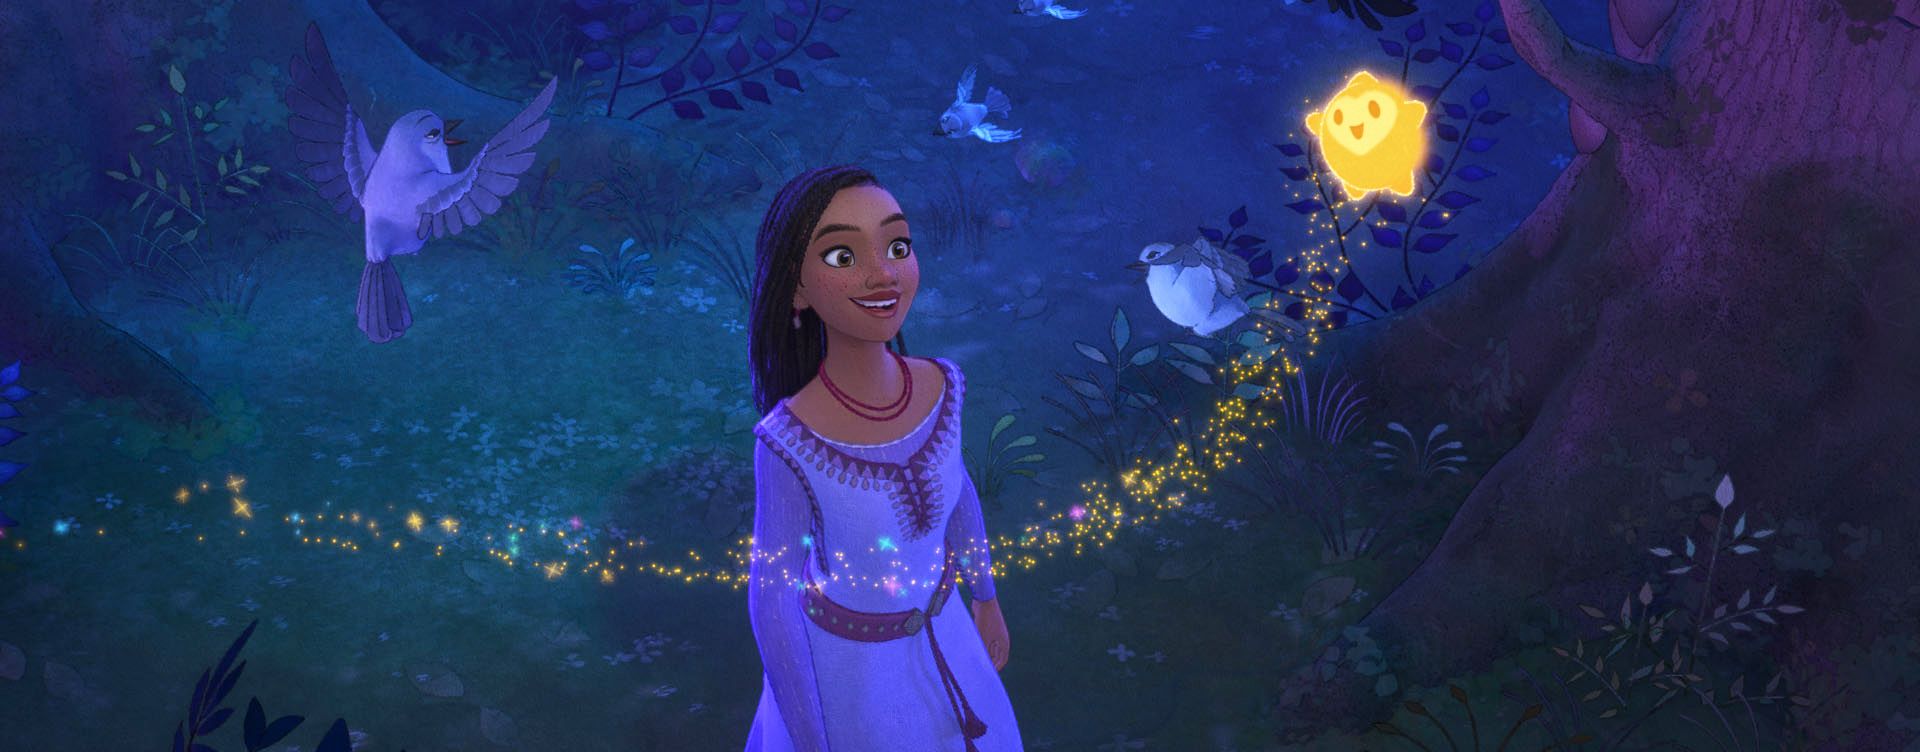 Celebrate the release of Disney's #Wish on Digital with this